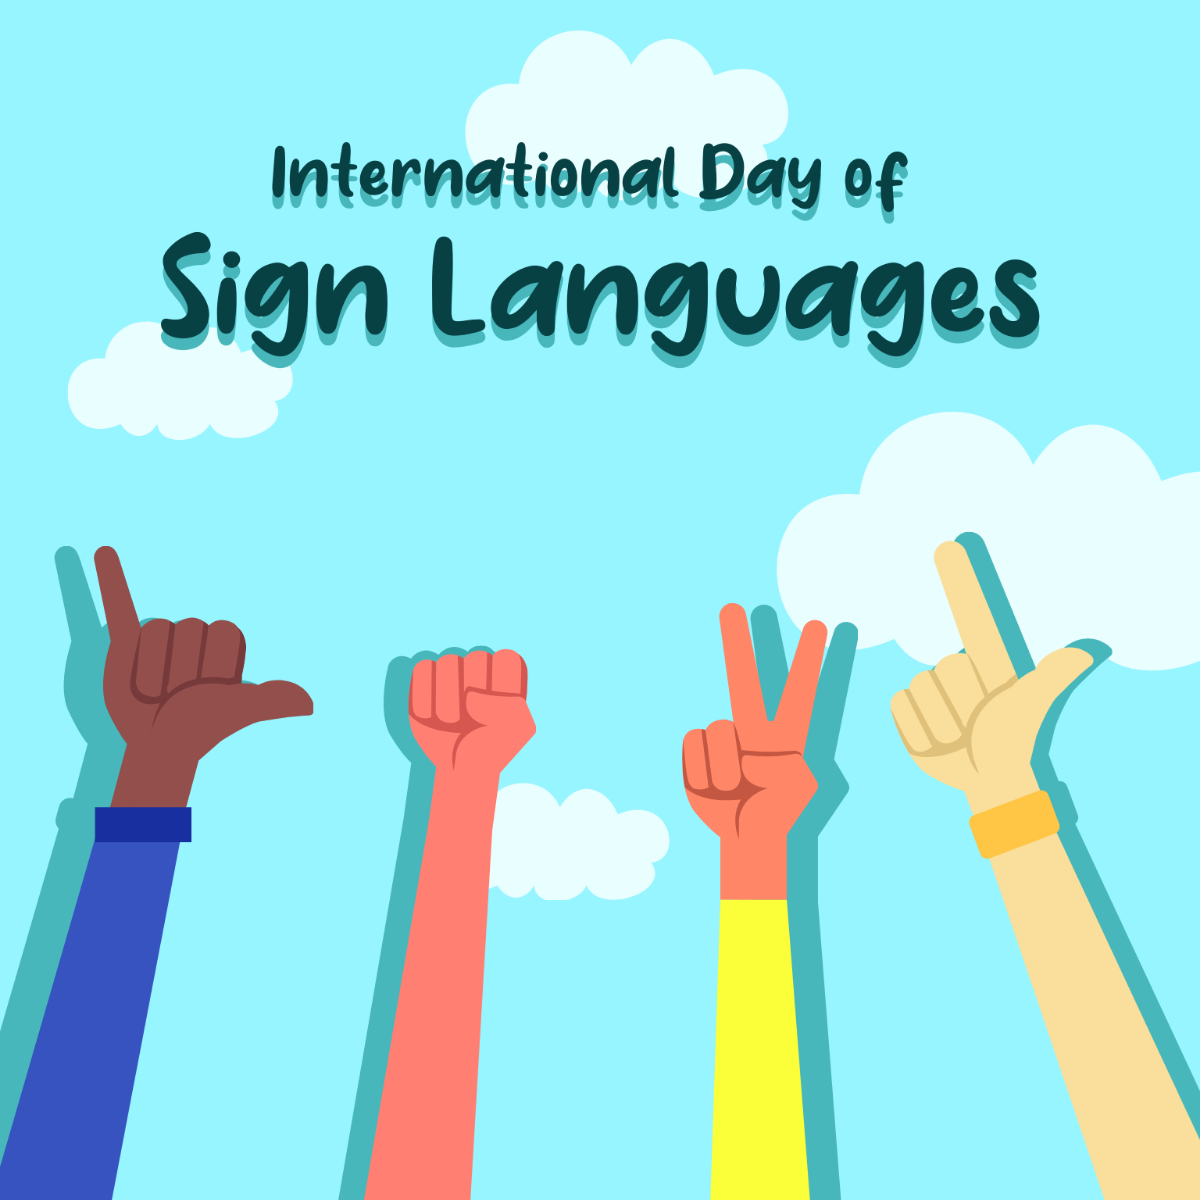 Free Happy International Day of Sign Languages Illustration Template